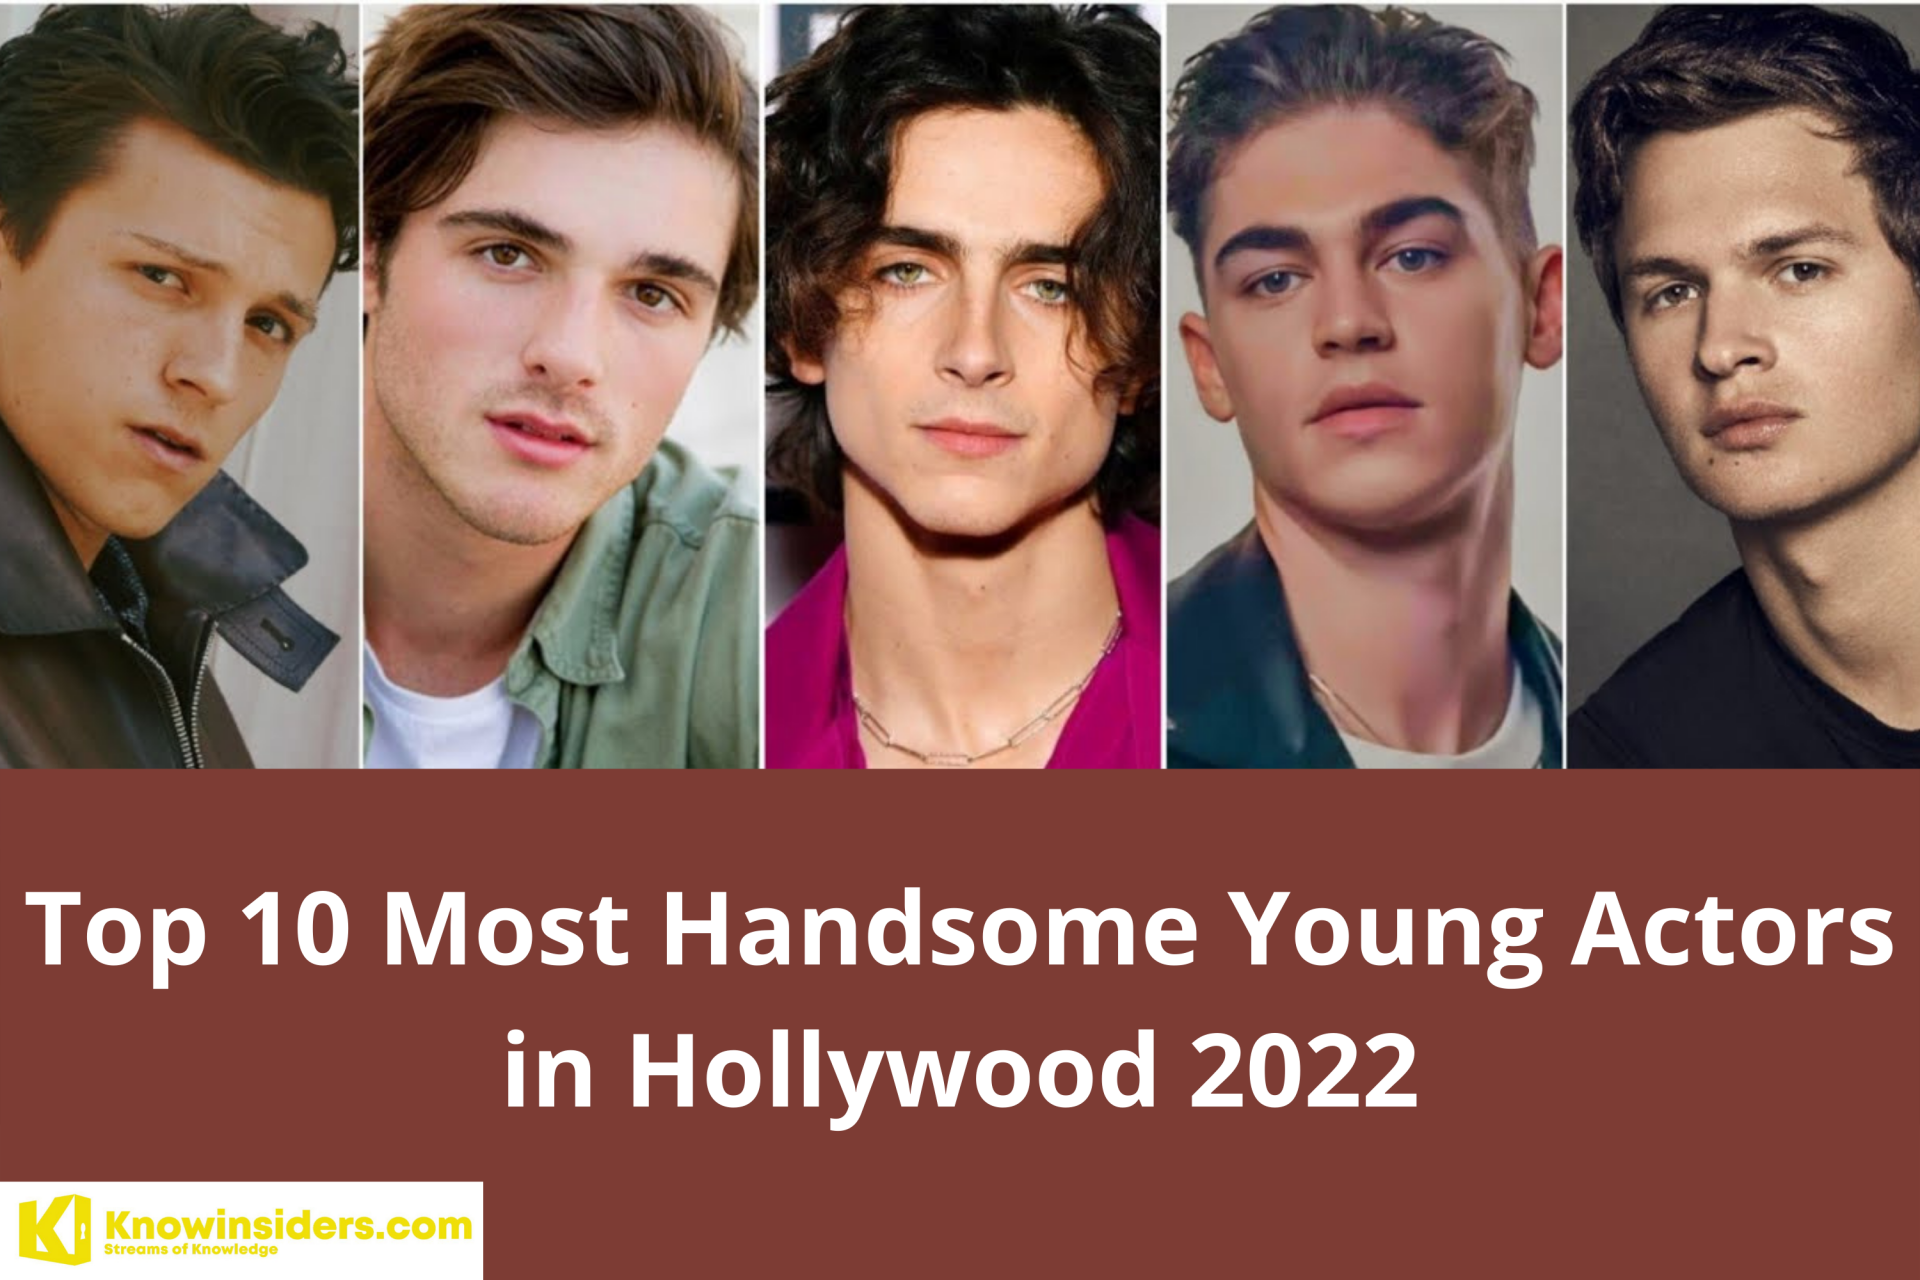 Top 10 Most Handsome Young Actors in Hollywood 2022